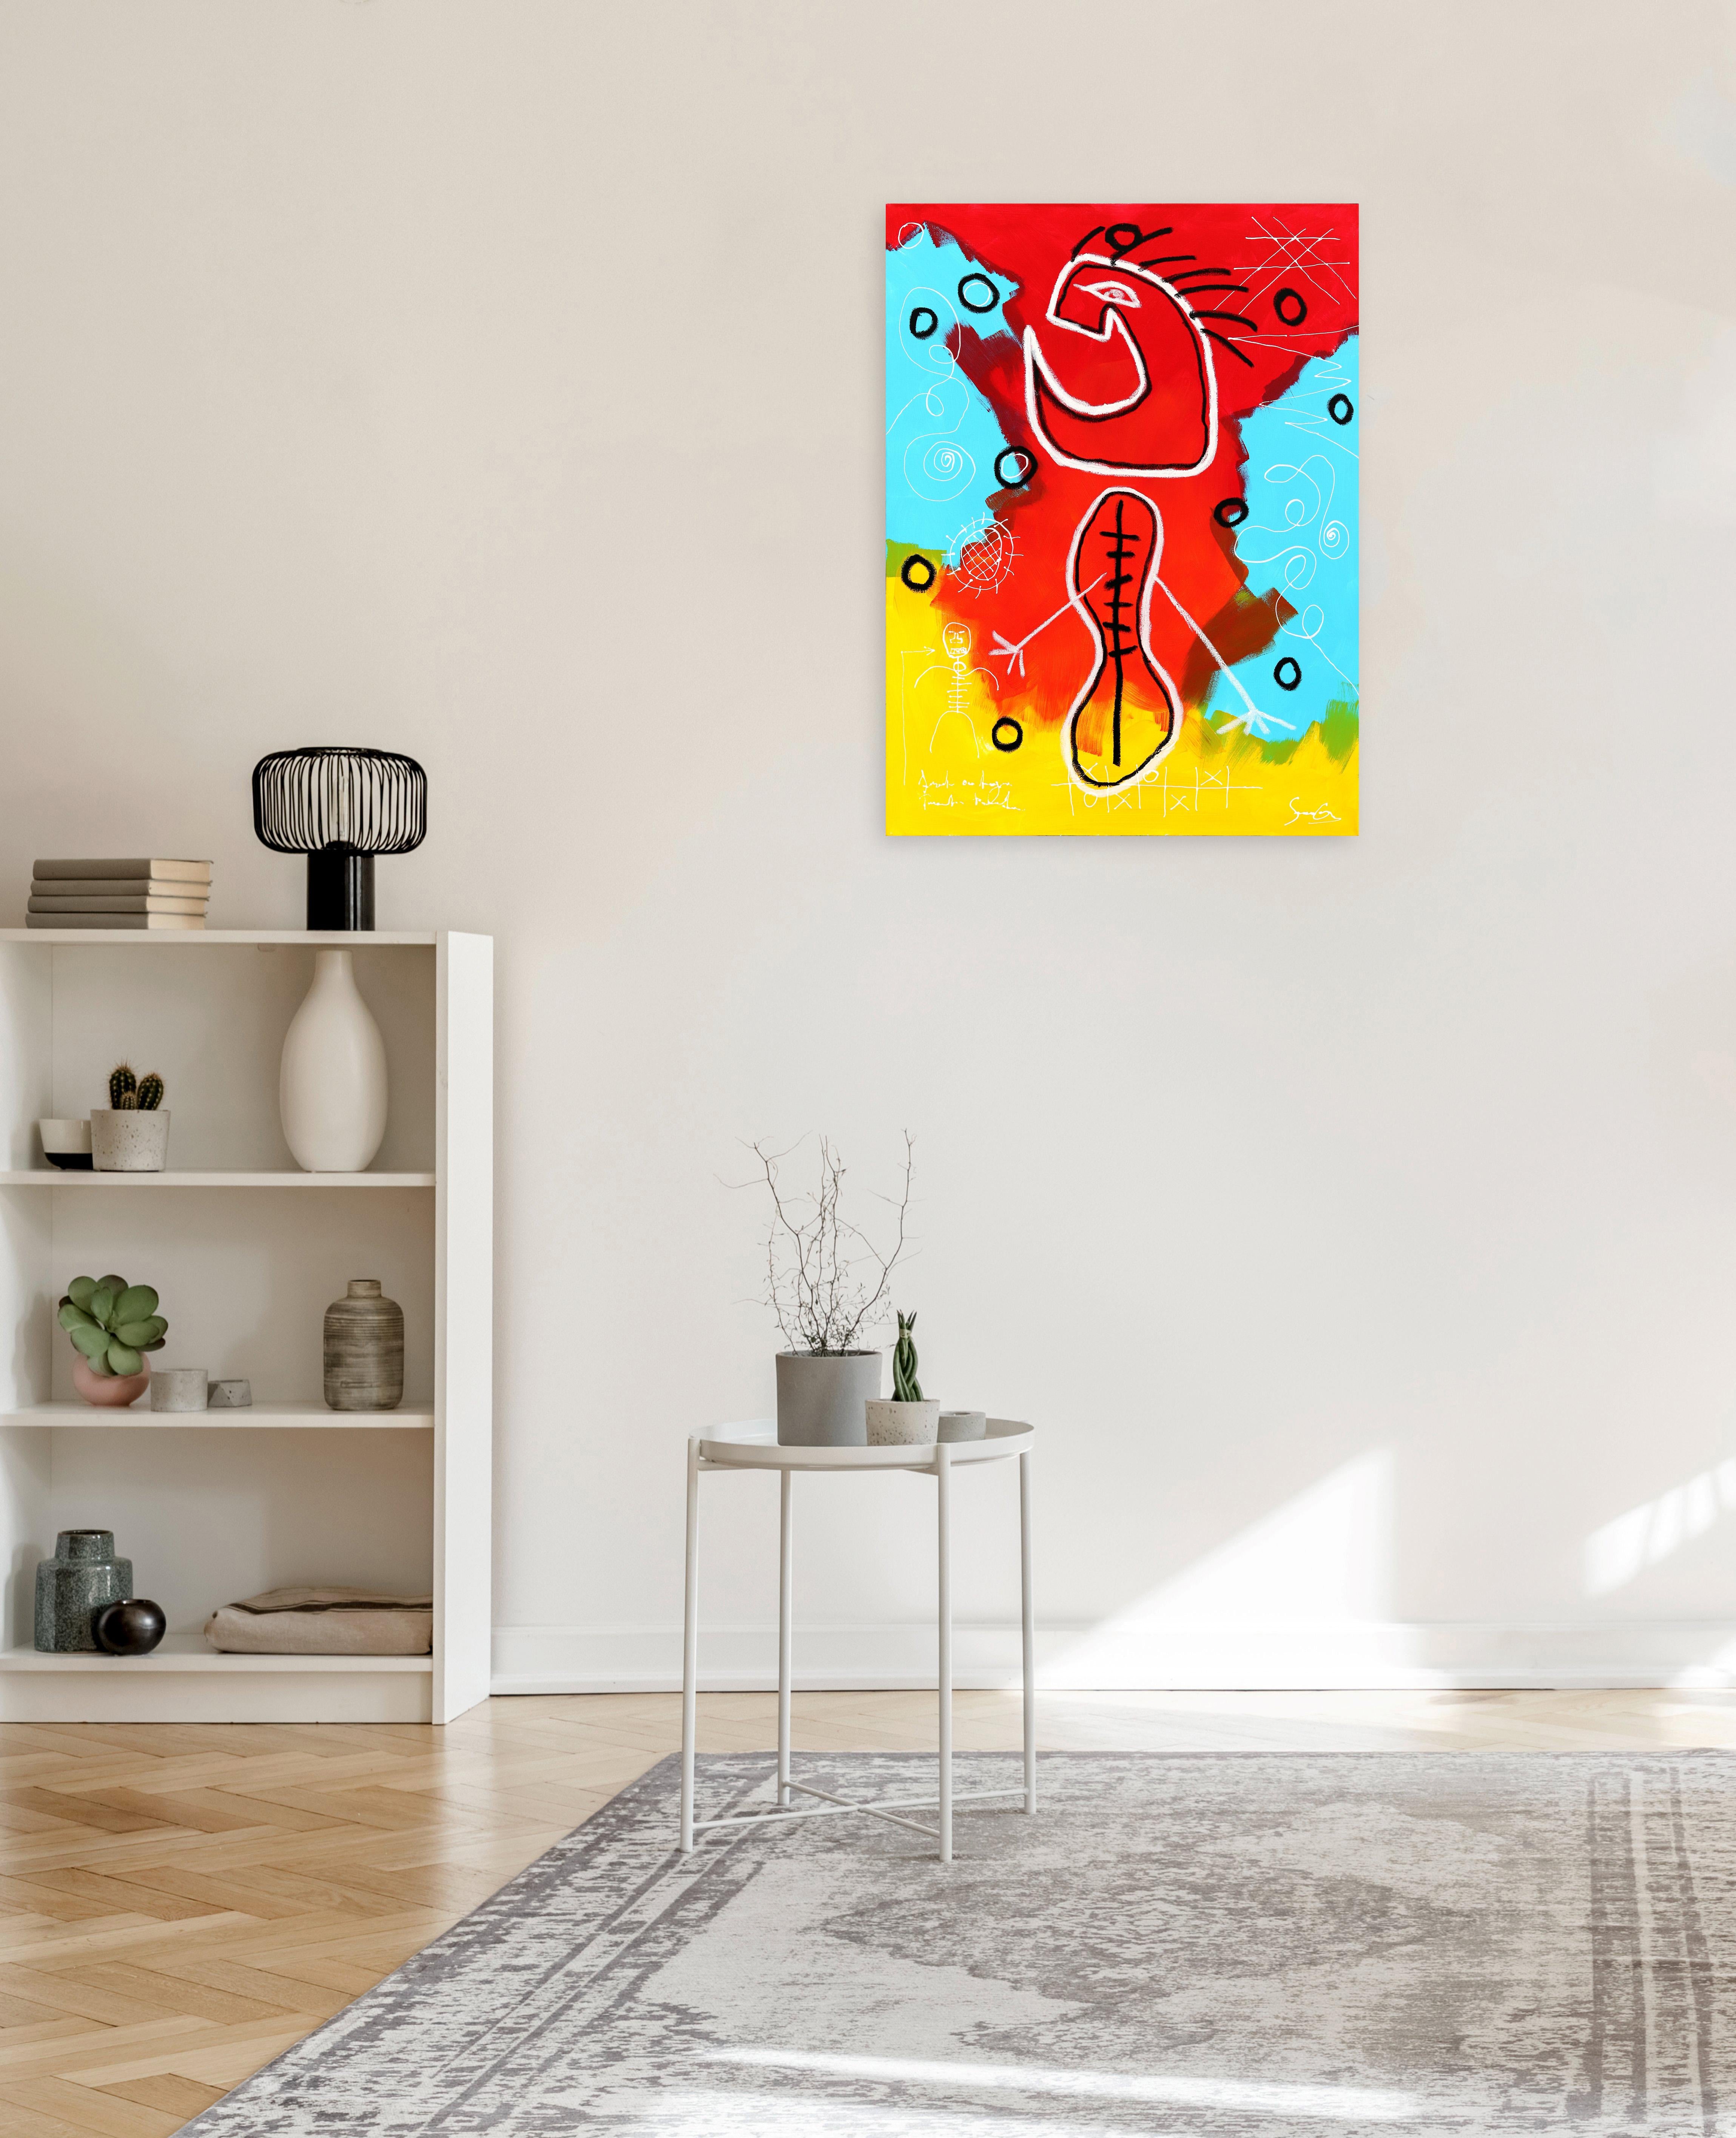 With cultural icons and world events acting as inspiration, artist Soren Grau strives to communicate meaning through figures and colors. He paints in a street art-inspired Neo-expressionist style inspired by artists such as Keith Haring and